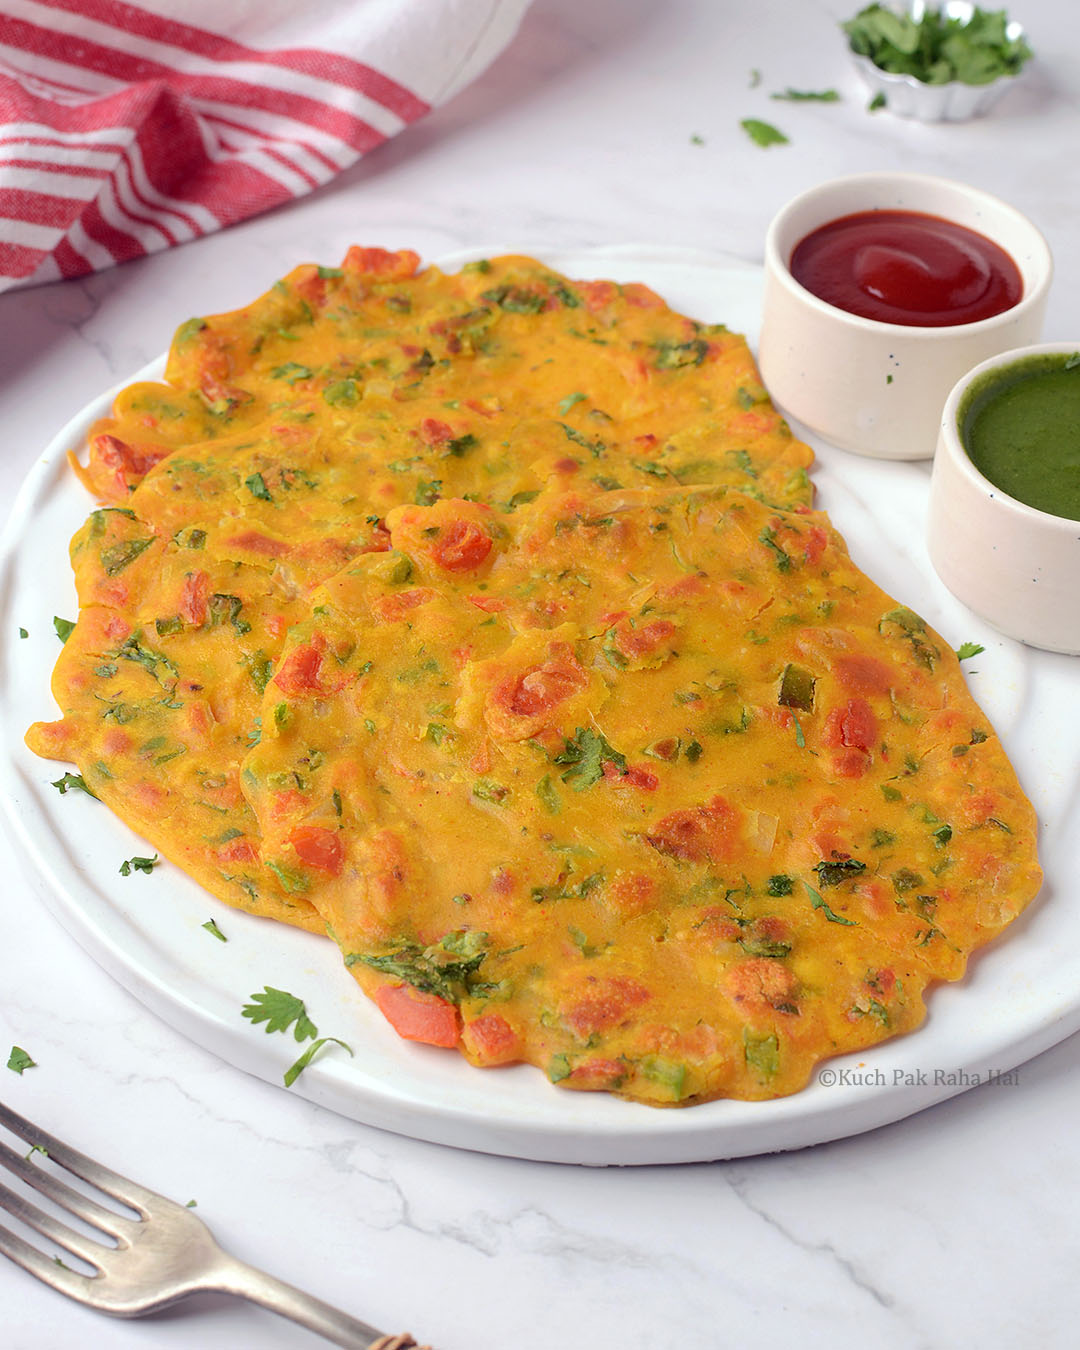 Besan chilla or chickpea flour pancakes with veggies.